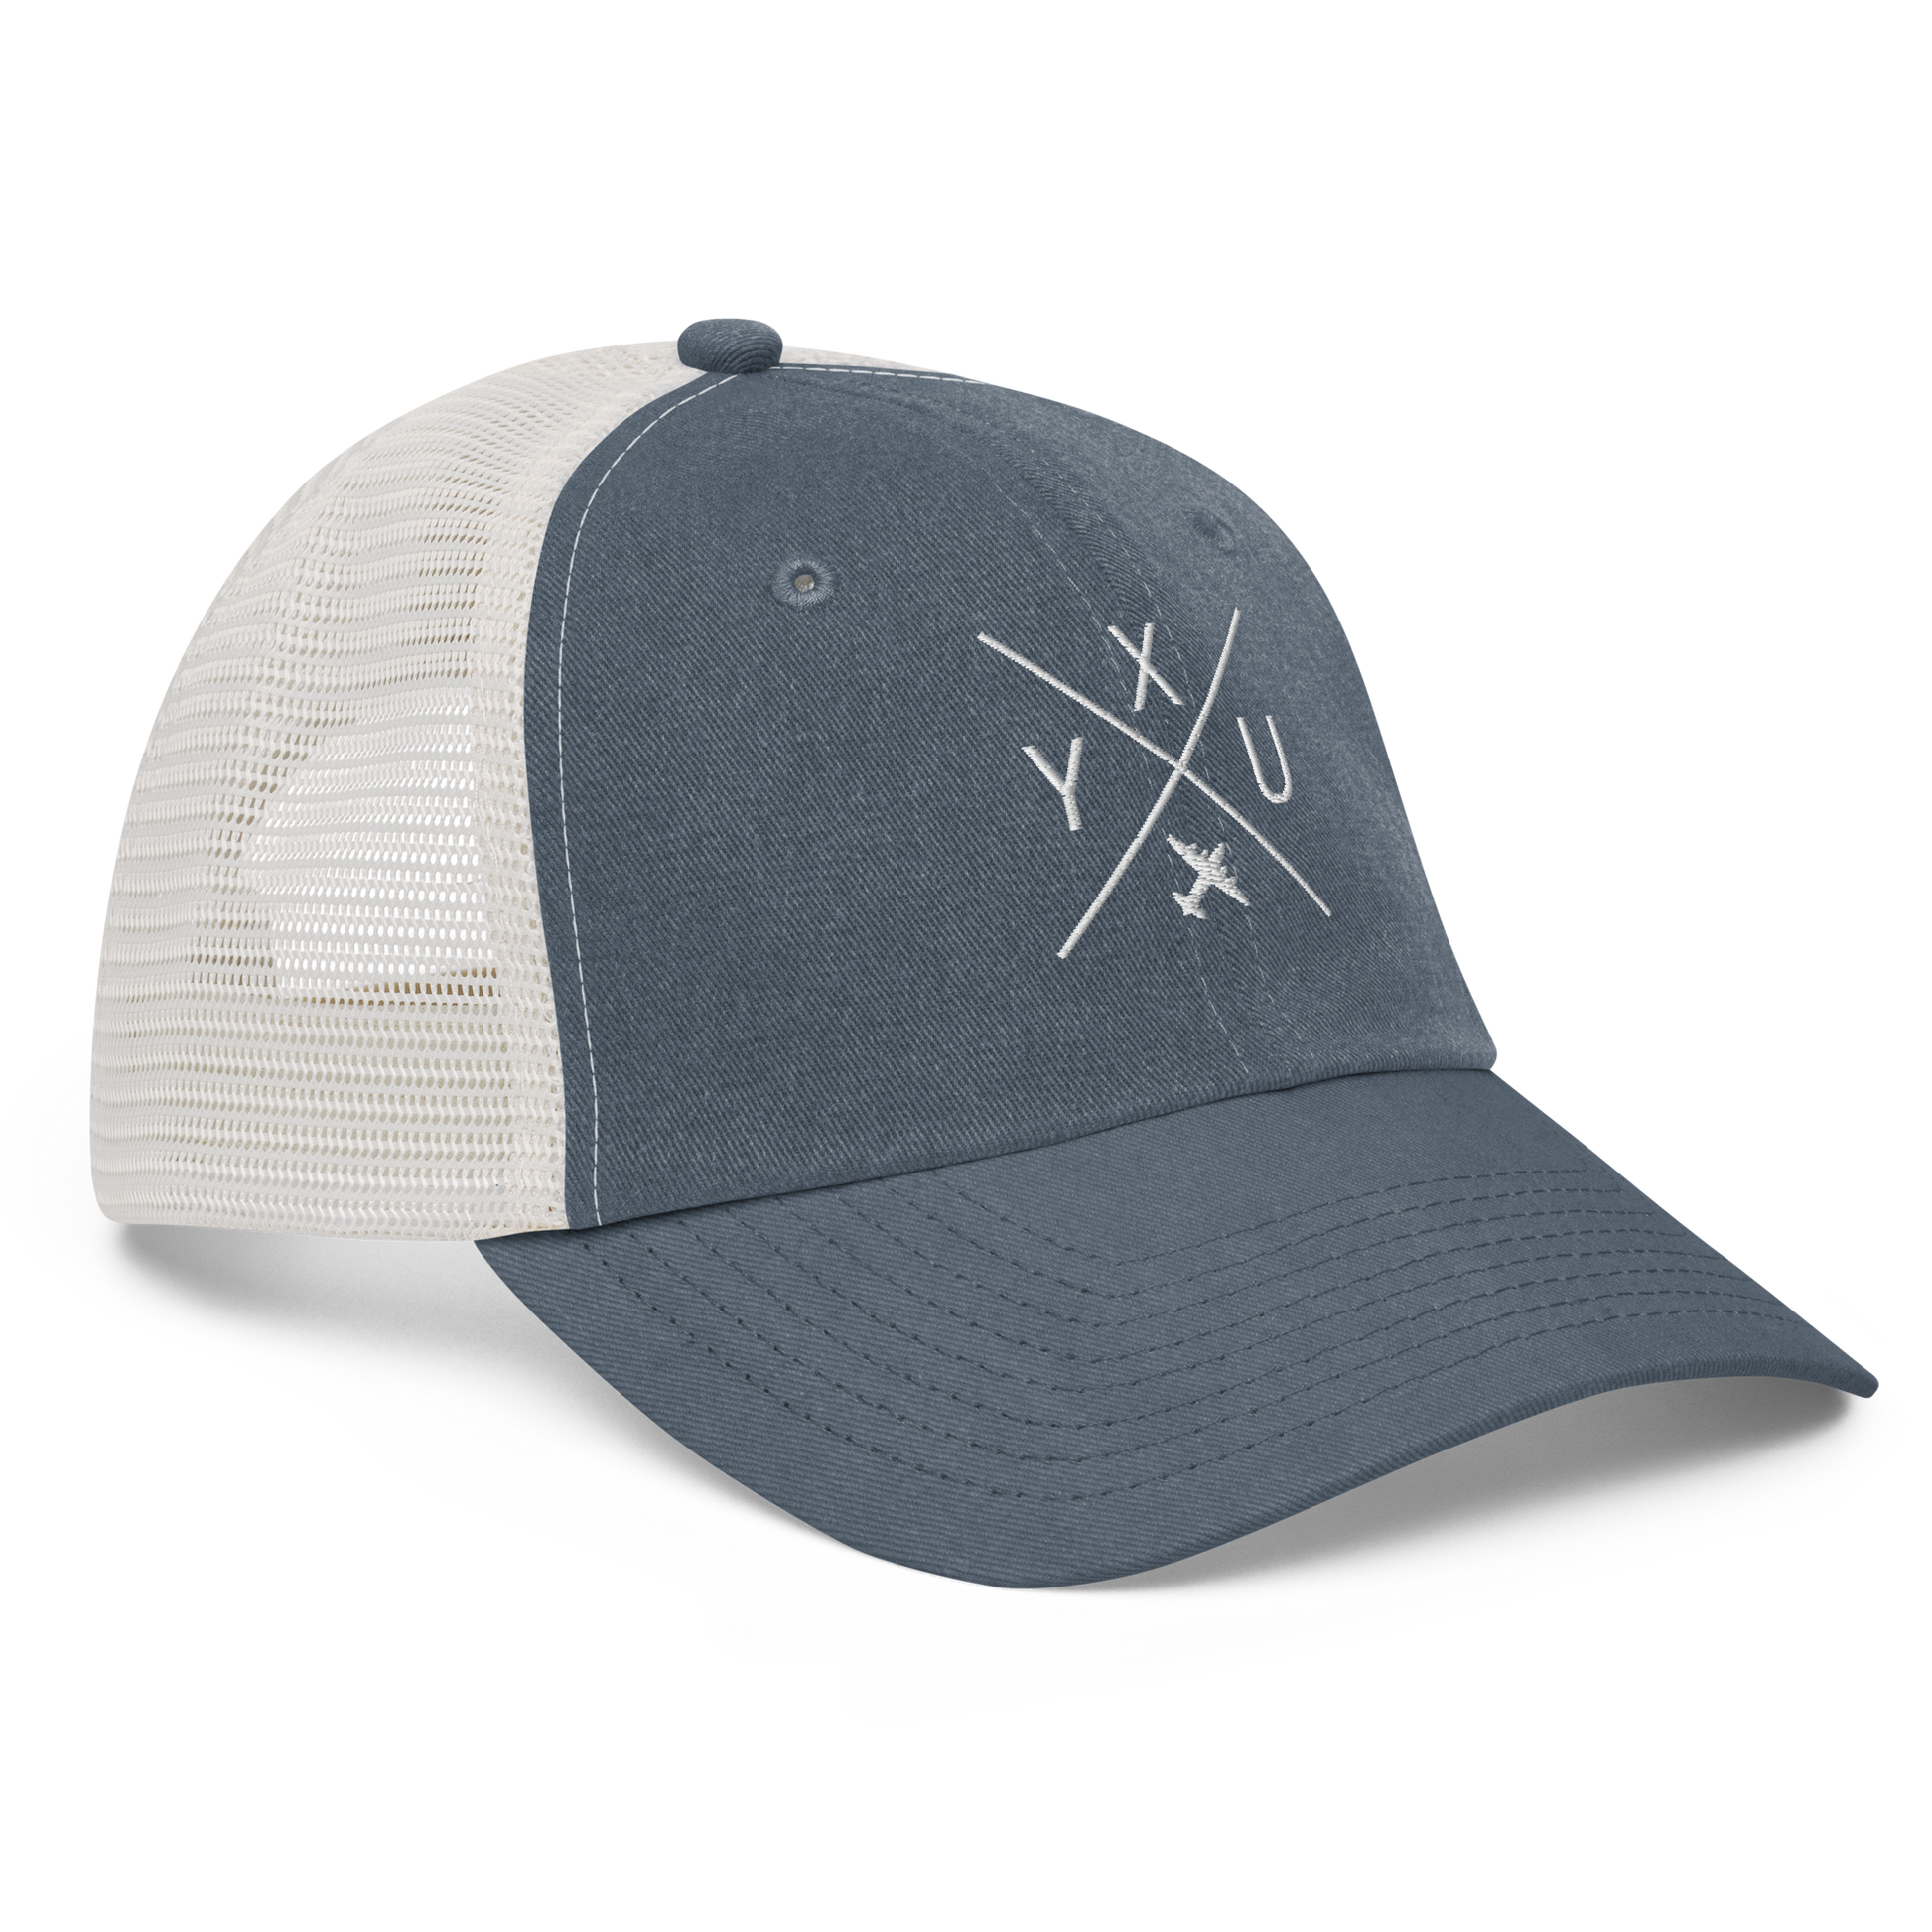 YHM Designs - YXU London Pigment-Dyed Trucker Cap - Crossed-X Design with Airport Code and Vintage Propliner - White Embroidery - Image 07